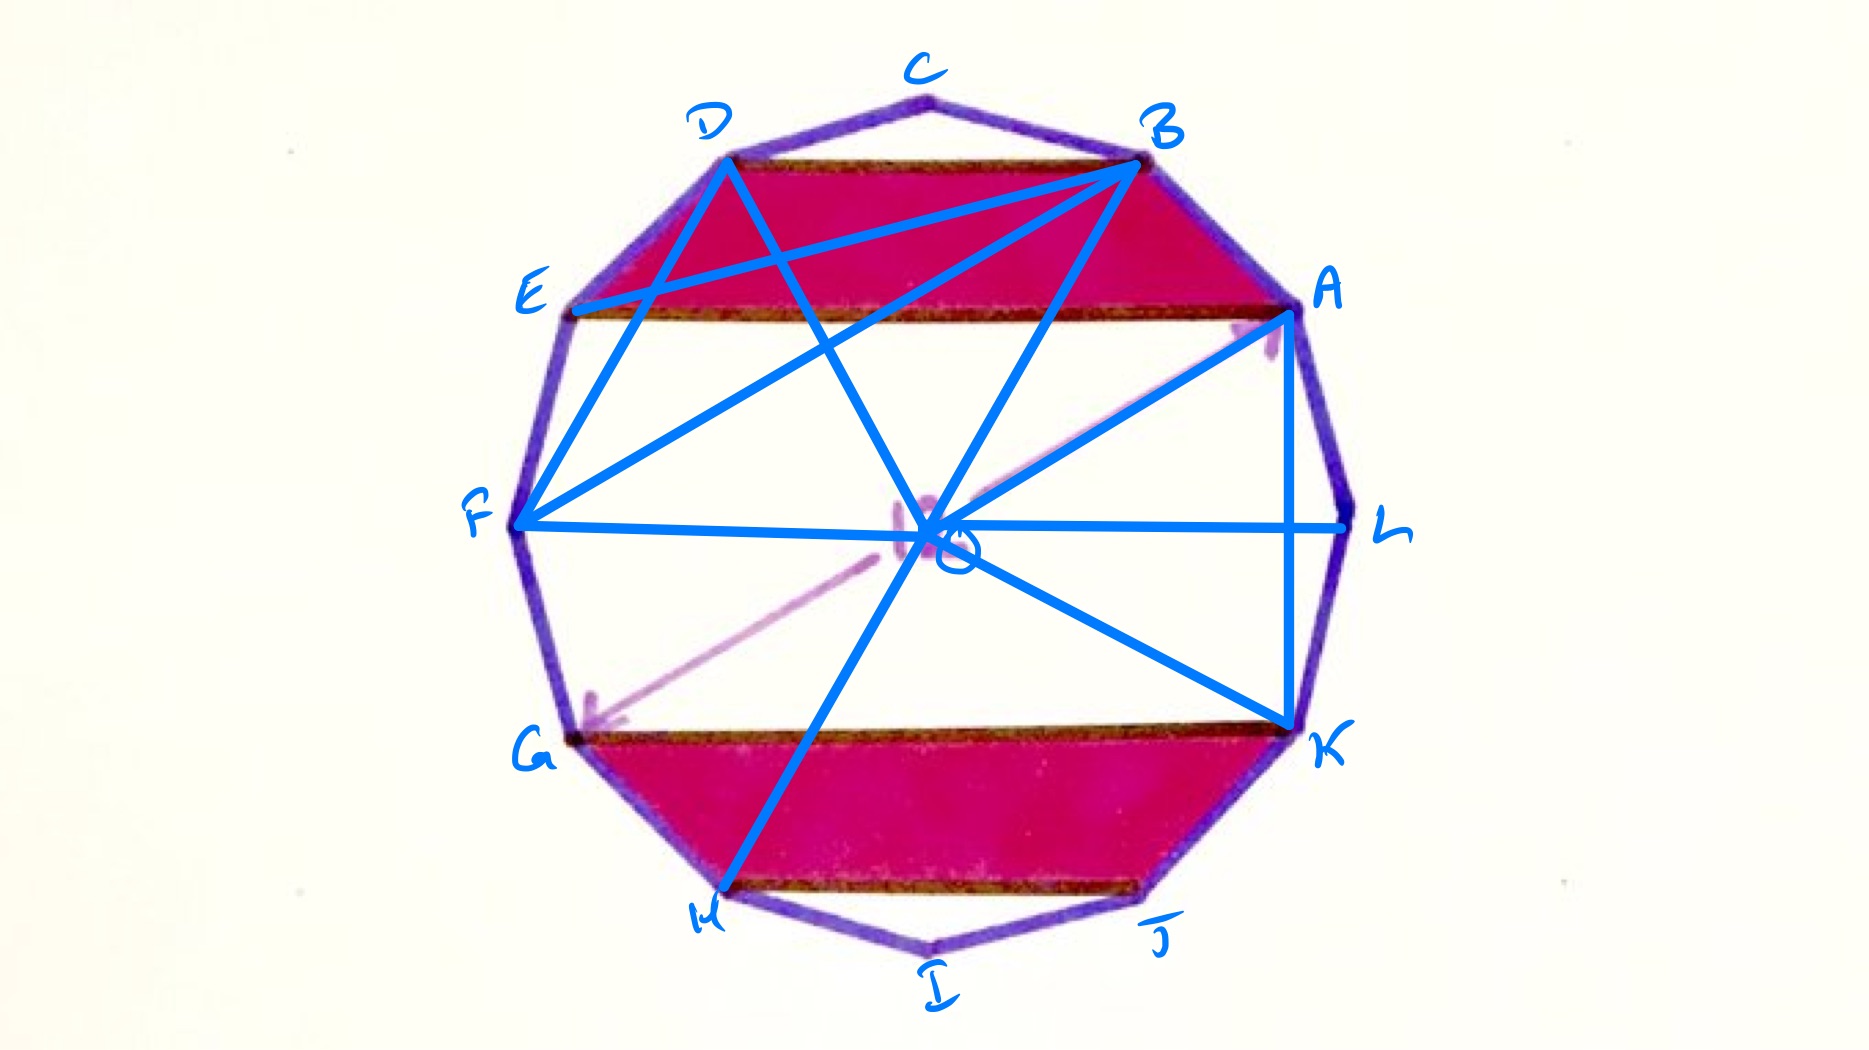 Striped dodecagon labelled